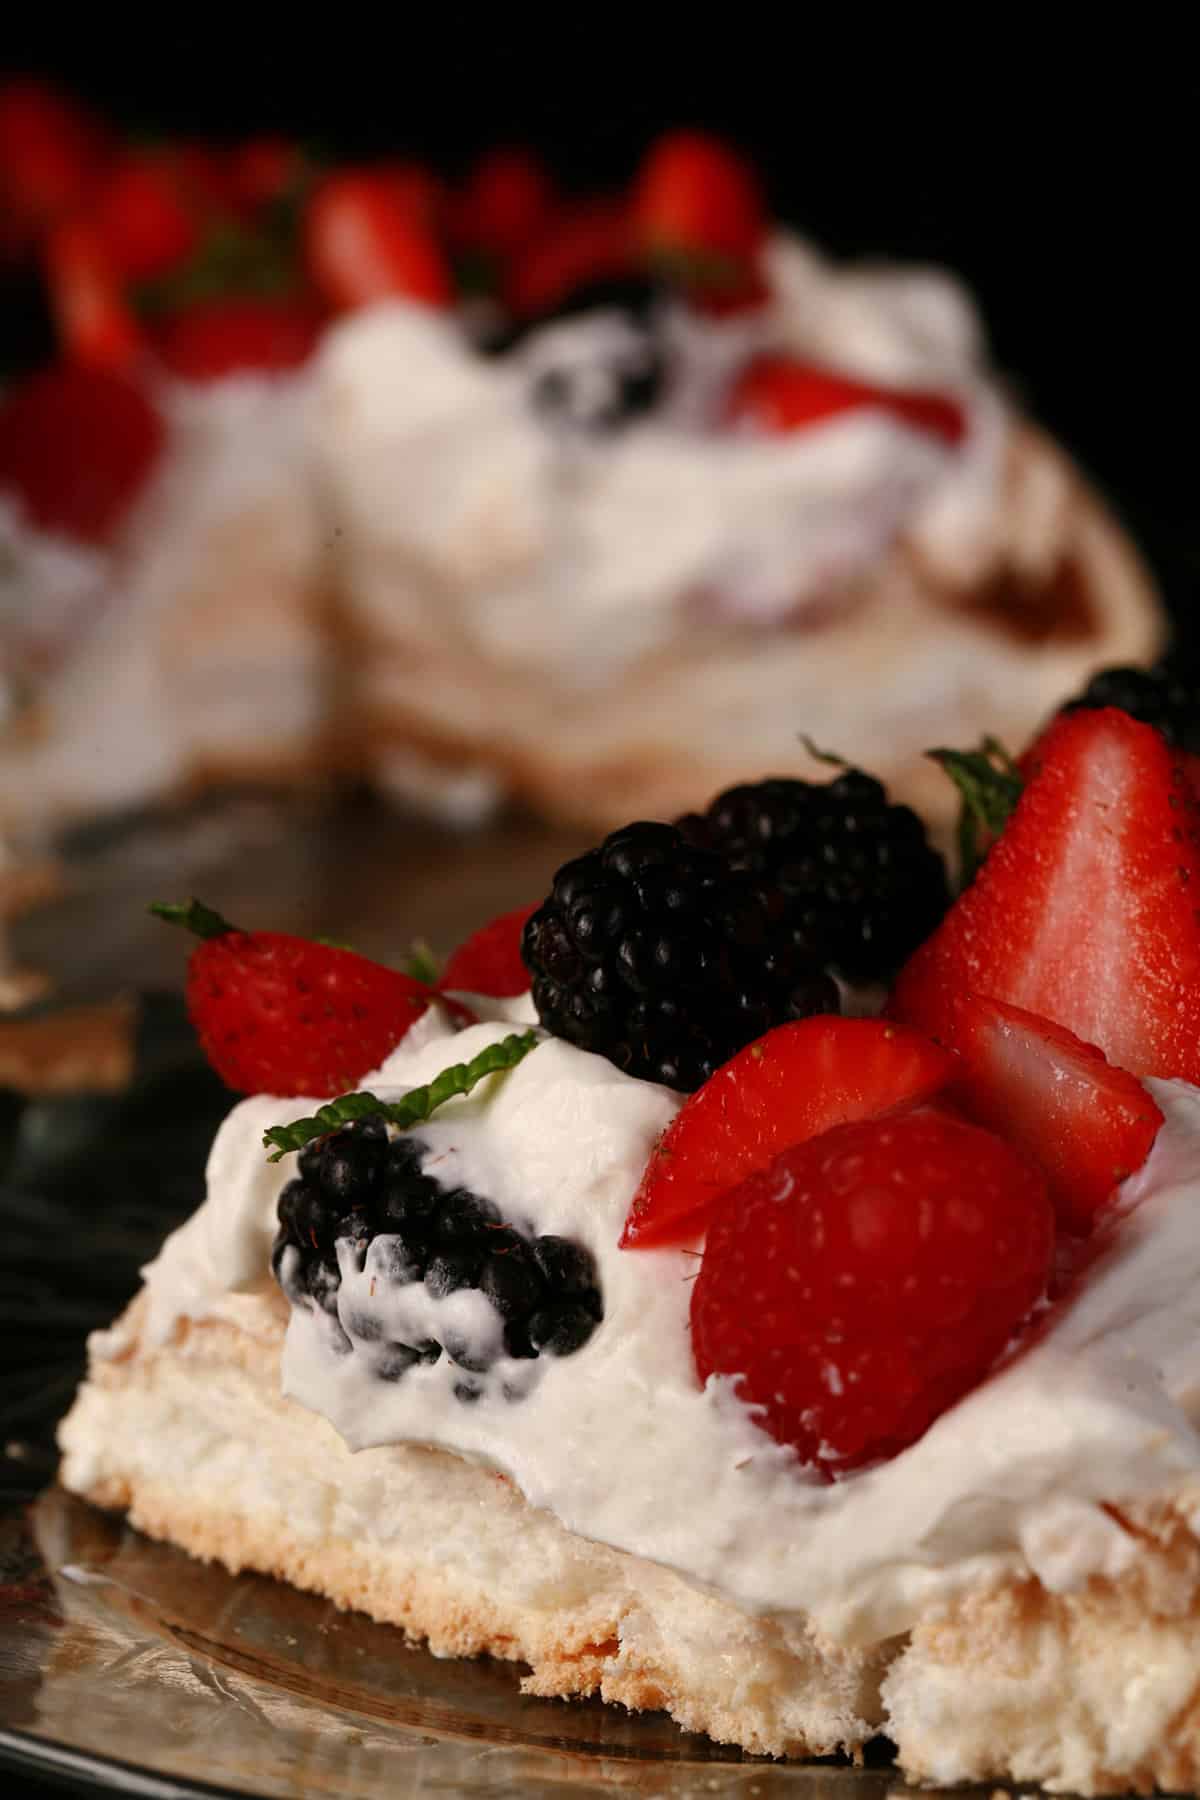 A slice of berry pavlova on a plate, with the remaining pavlova behind it.